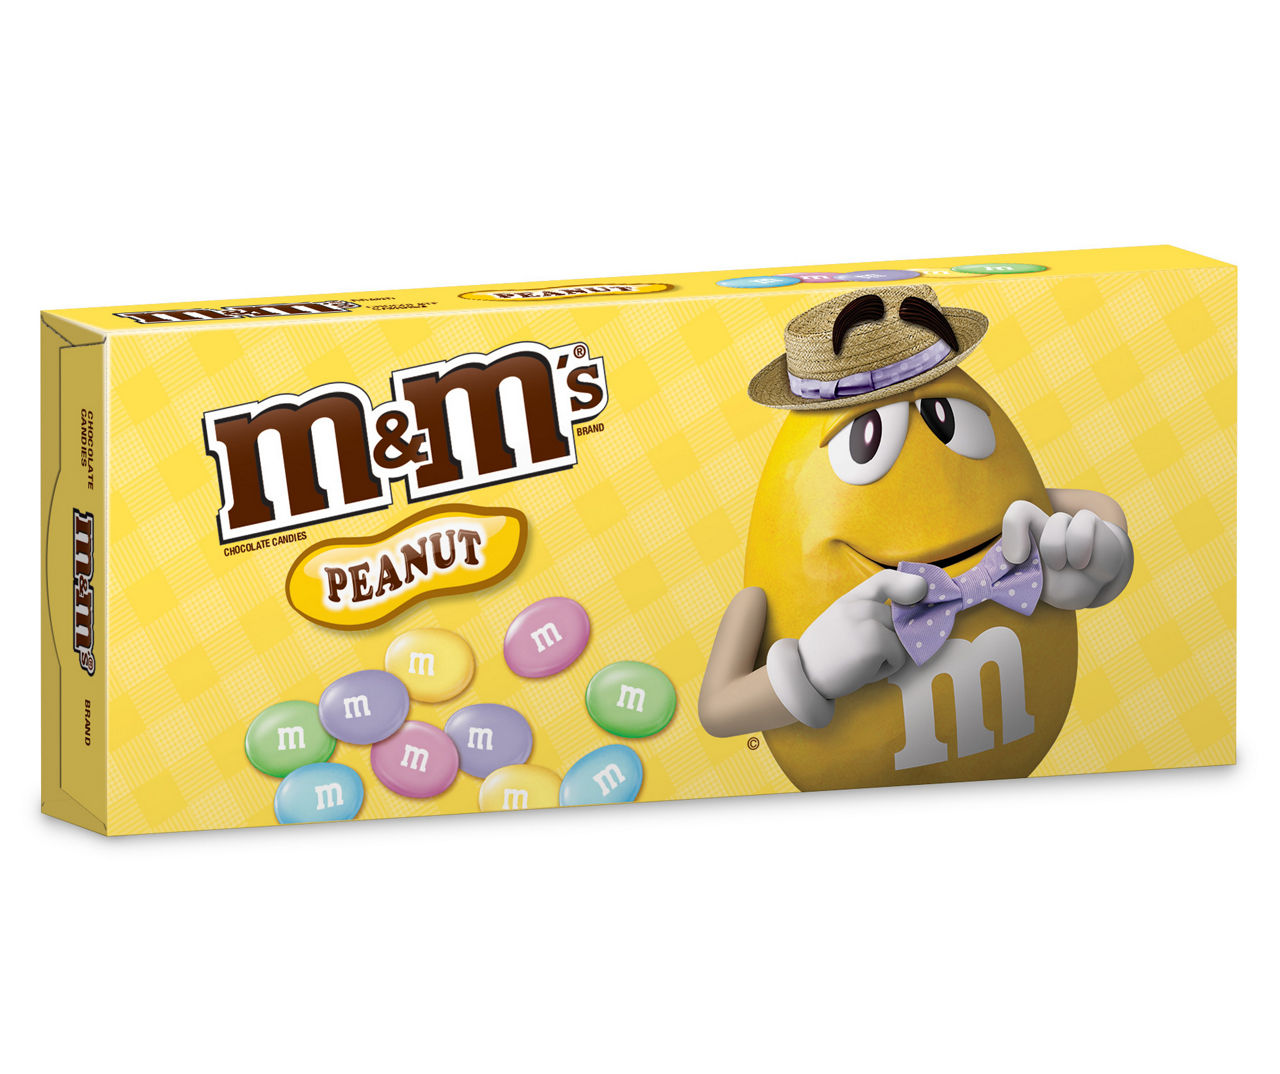 M&M's Easter Spring Milk Chocolate Candies Pastel Colors